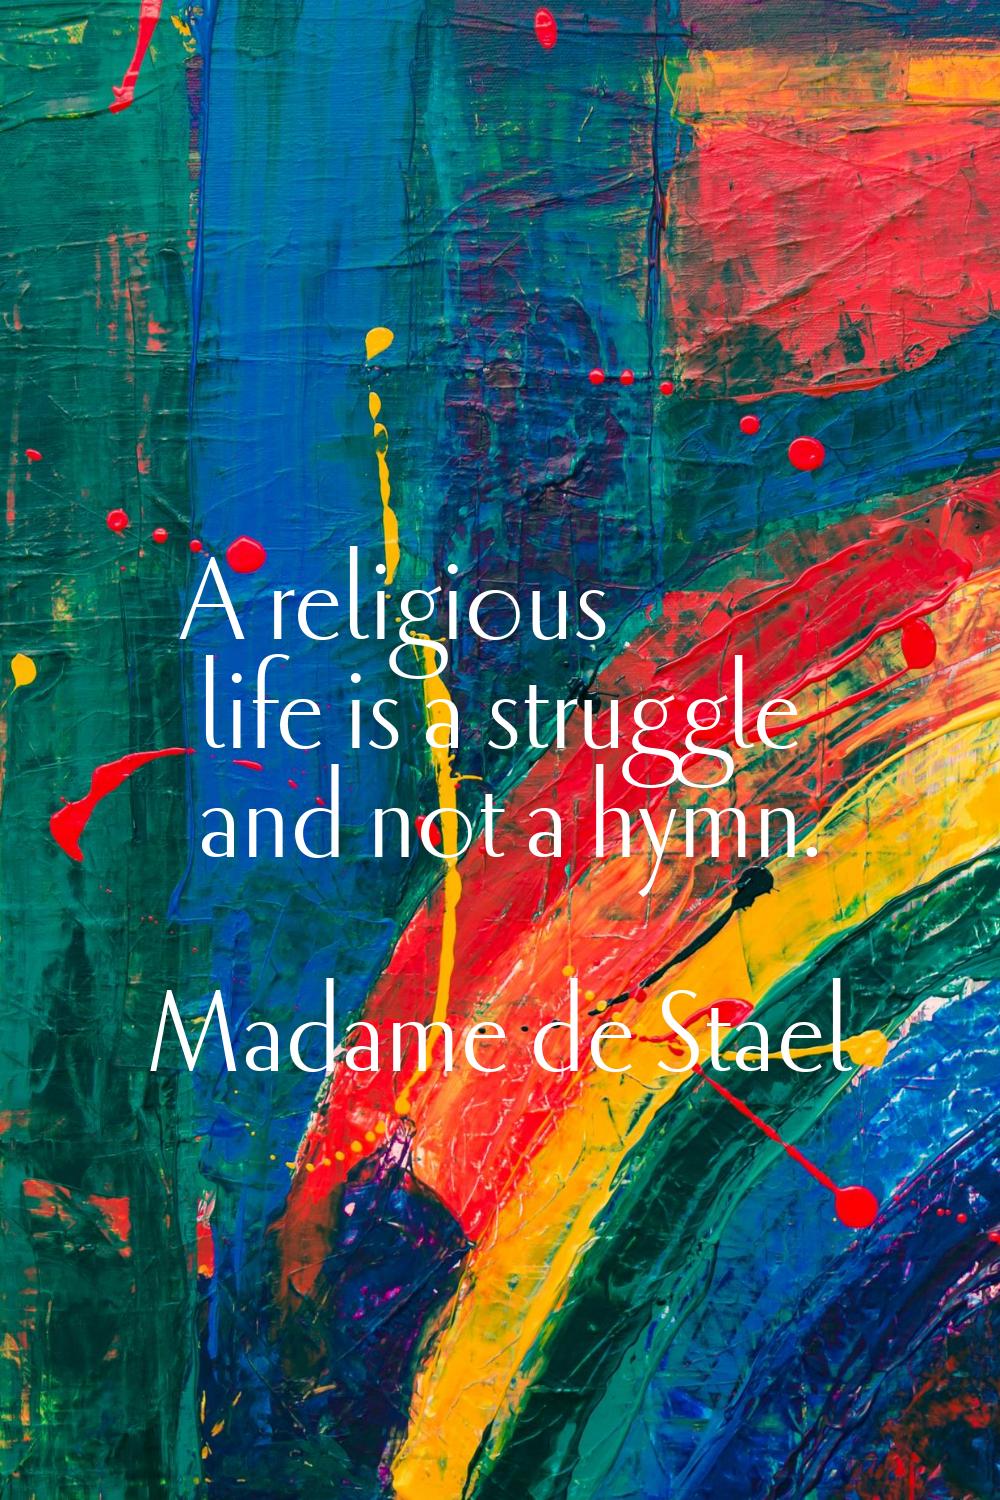 A religious life is a struggle and not a hymn.